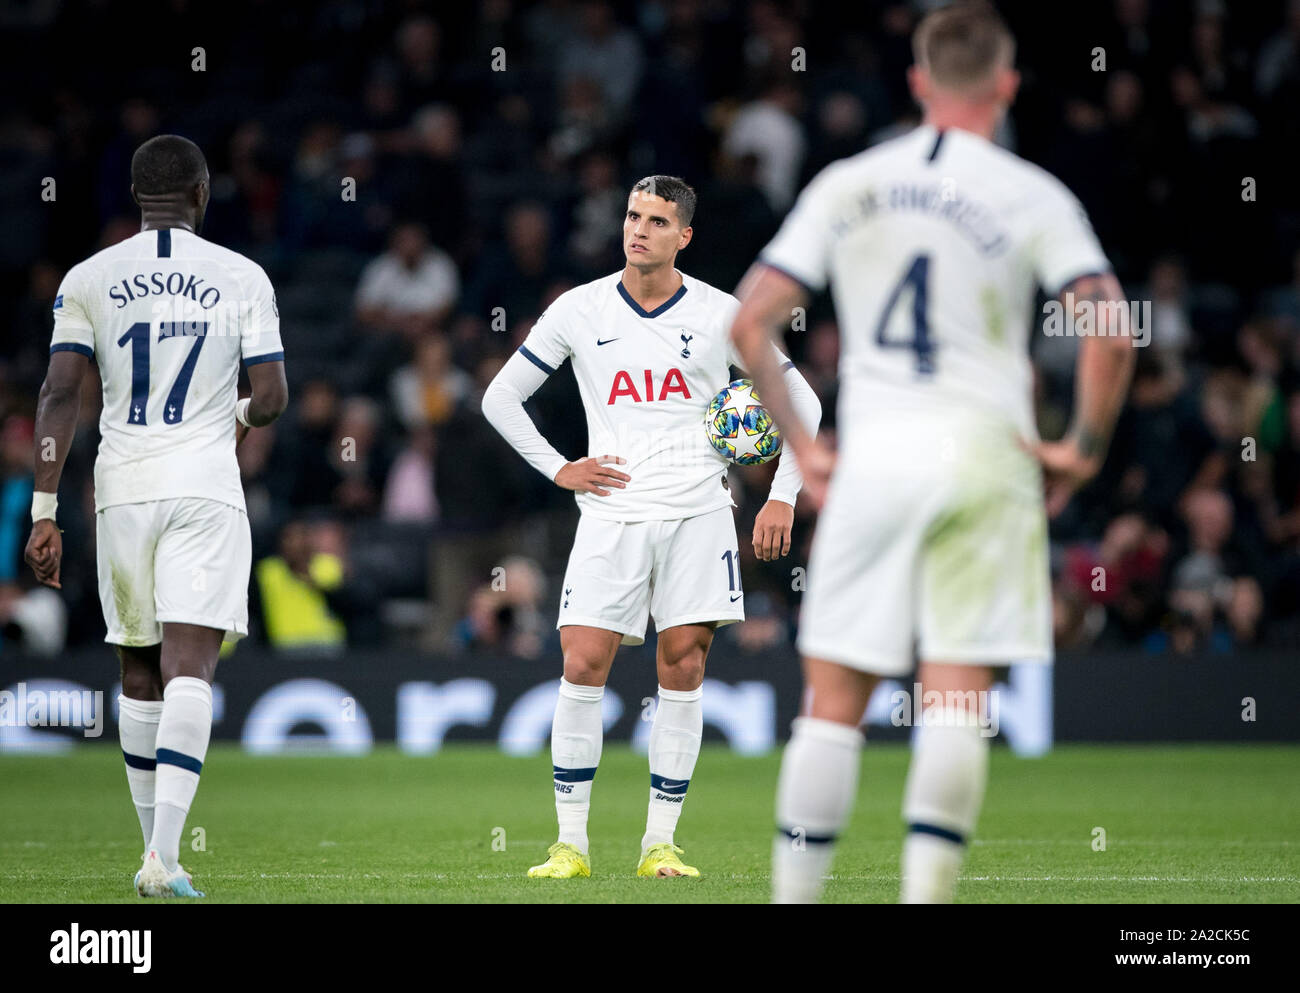 London, UK. 01st Oct, 2019. Erik Lamela of Spurs after Bayern Munich 7th goal during the UEFA Champions League group match between Tottenham Hotspur and Bayern Munich at Wembley Stadium, London, England on 1 October 2019. Photo by Andy Rowland. Credit: PRiME Media Images/Alamy Live News Stock Photo